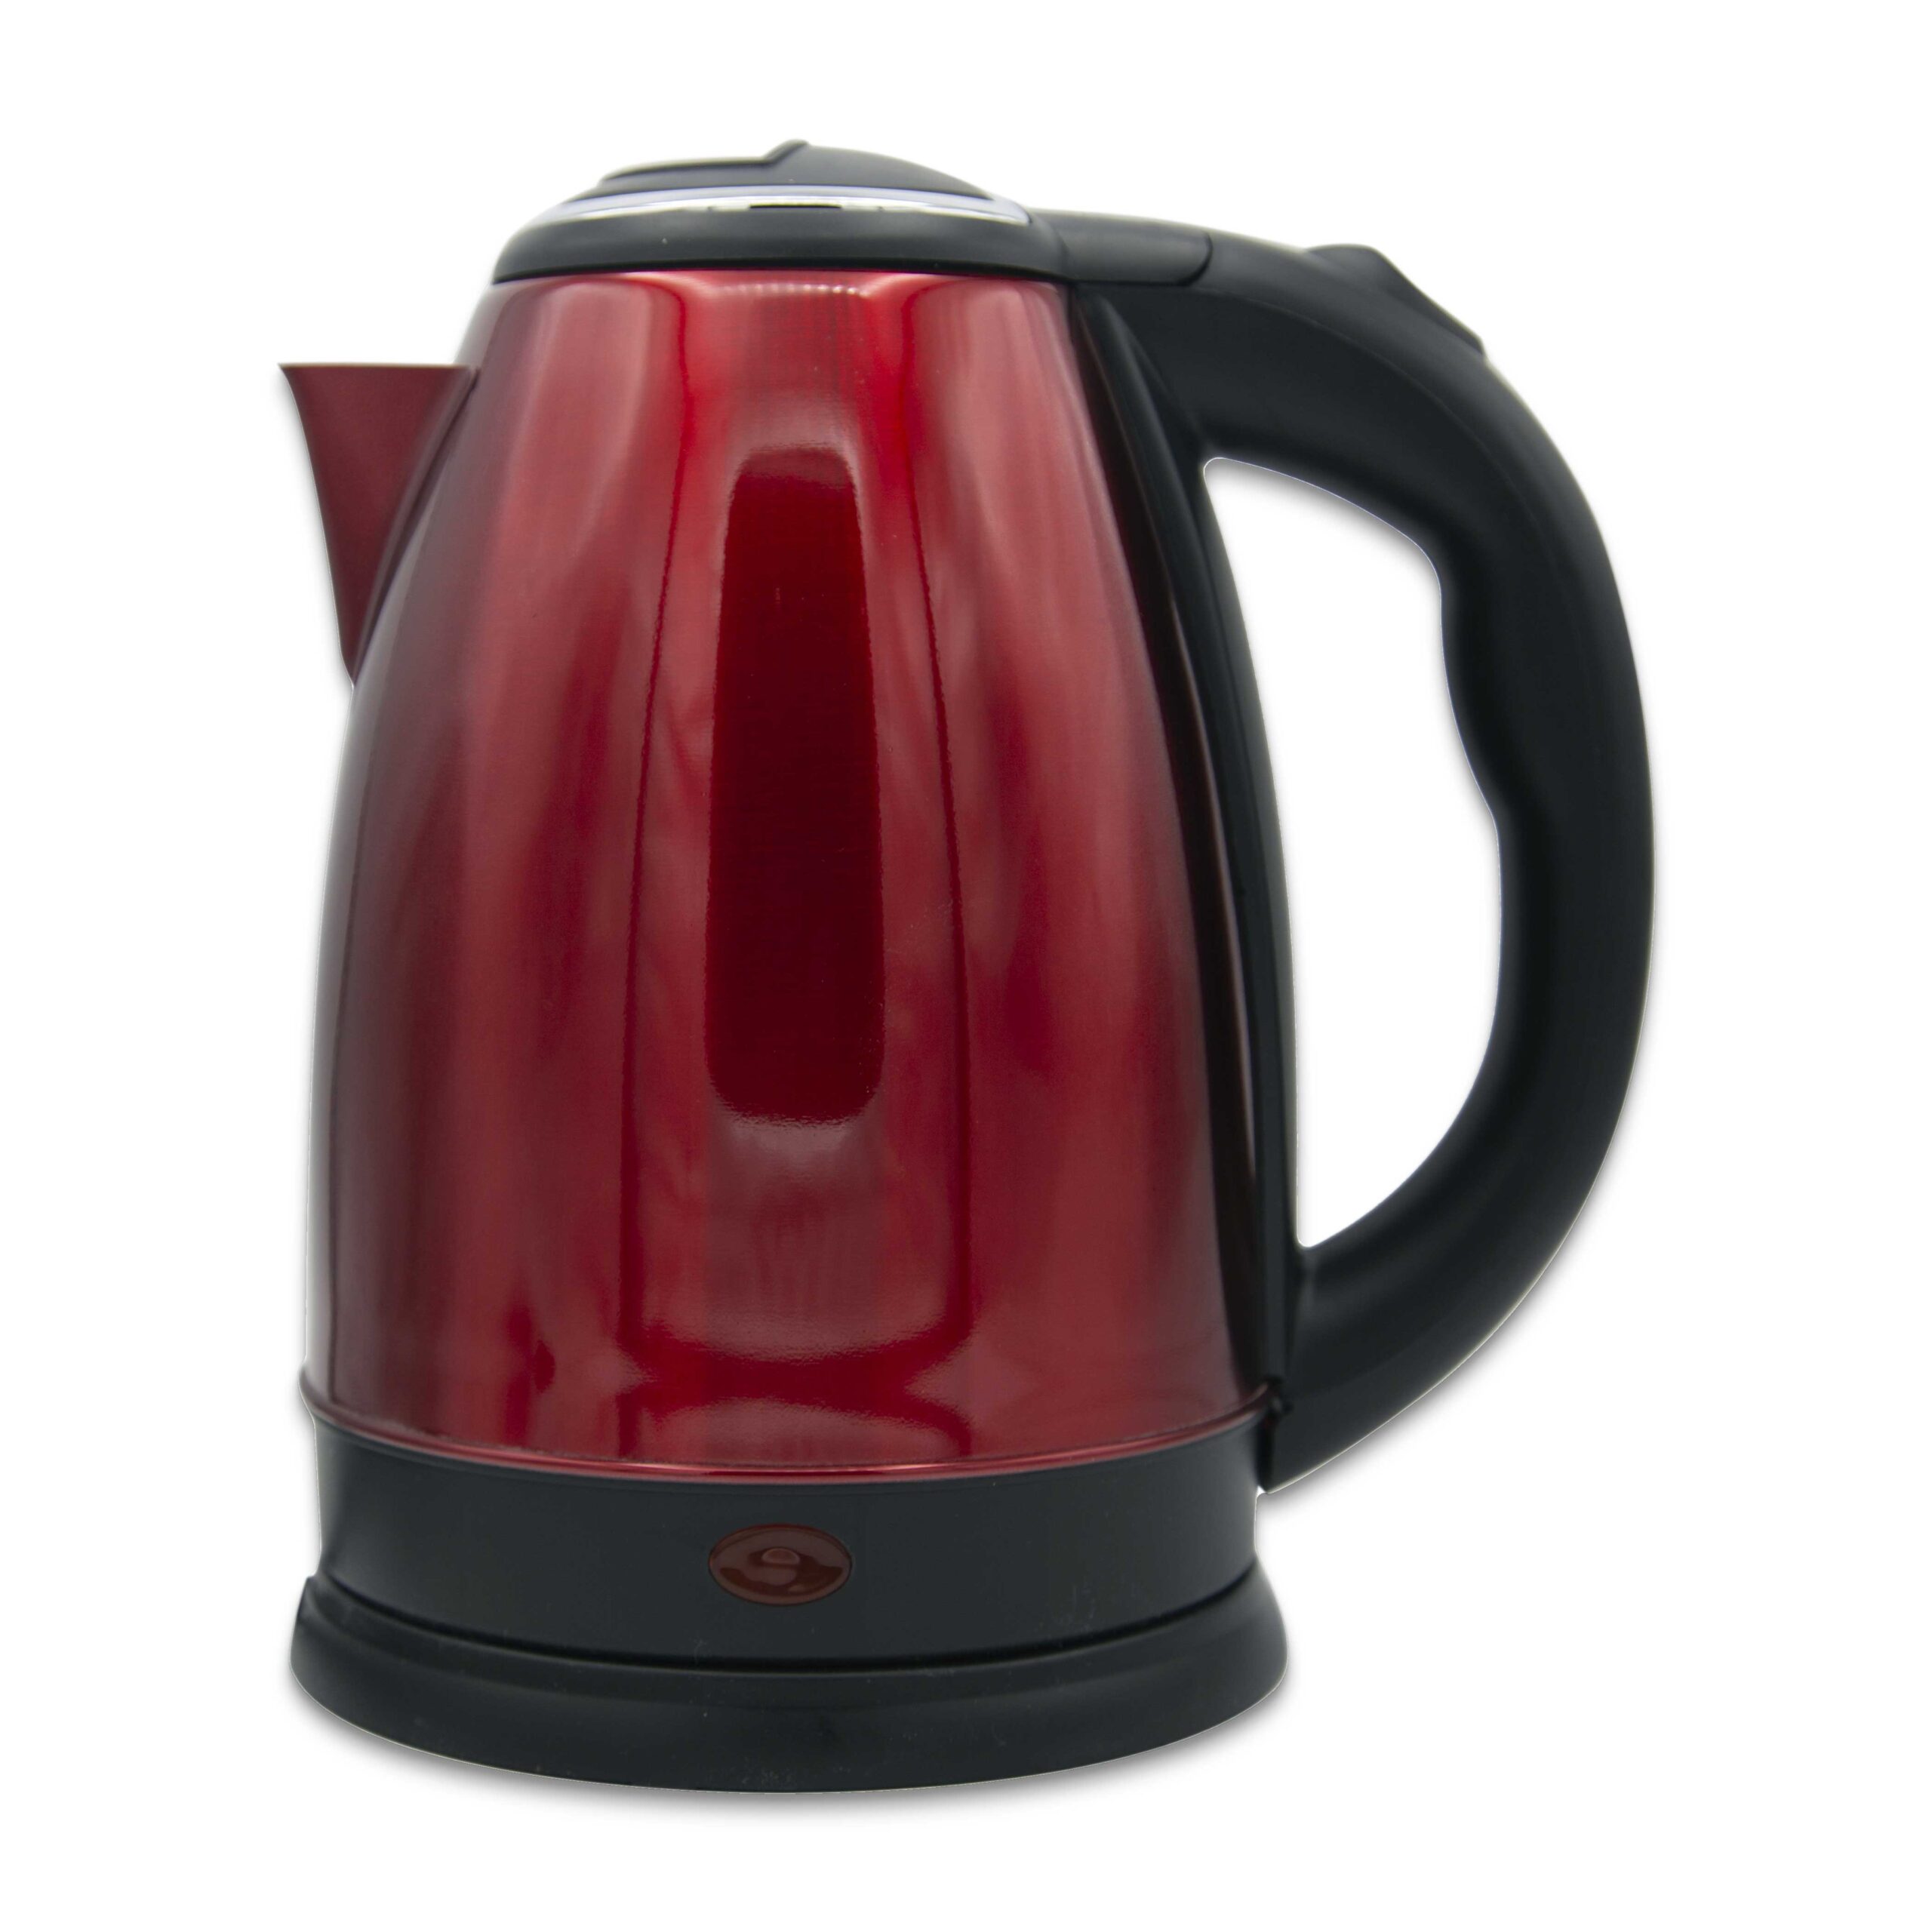 https://wickedtea.life/wp-content/uploads/2020/05/58-KETTLE_RED_1Edited-scaled.jpg